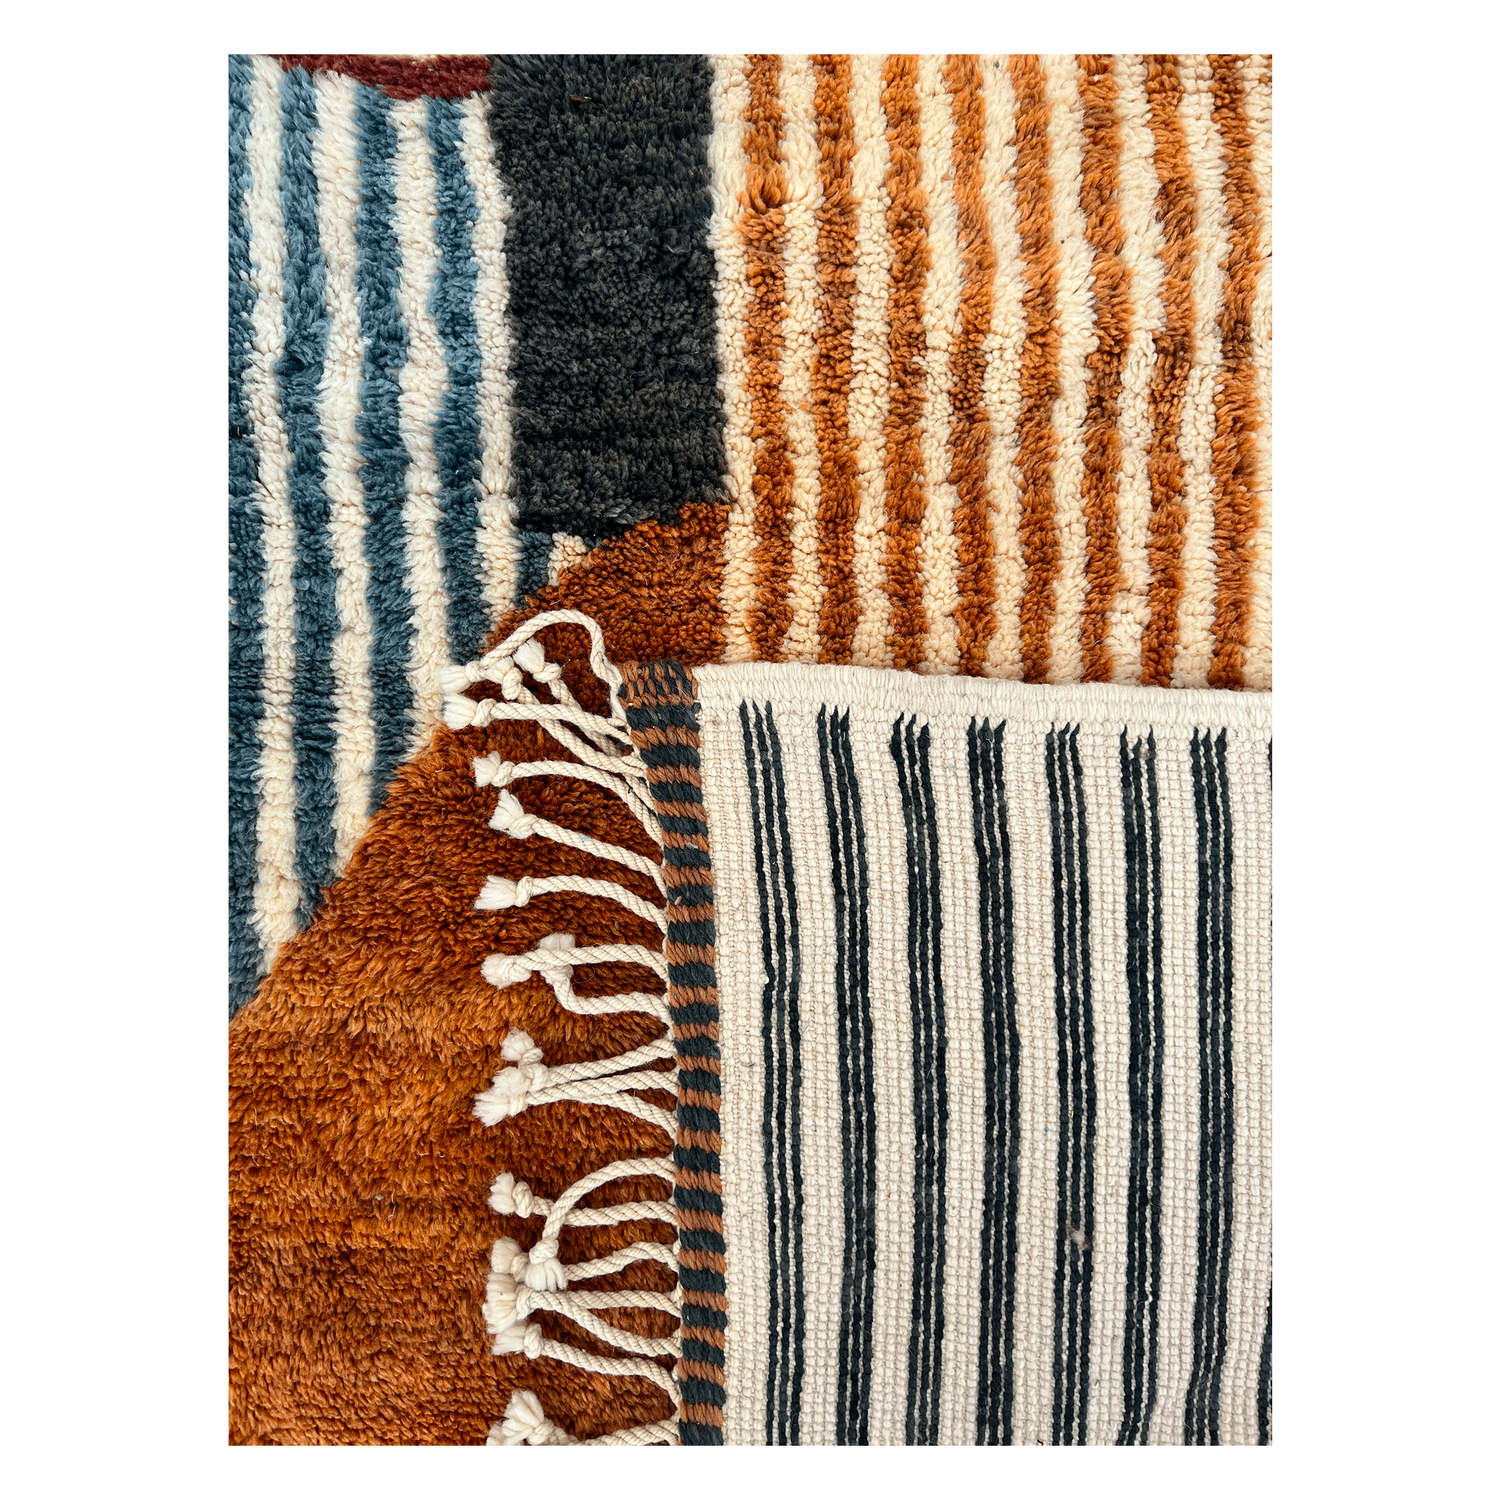  Elevate your space with the Modern Mrirt Moroccan Wool Rug. Featuring a contemporary design of solid color lines and abstract half circles in Blue, Black, Deep Brown, Maroon, and Cream, this handcrafted rug exudes luxury. Perfect for modern and eclectic styles. Shop now for an ultra-luxe addition to your home.